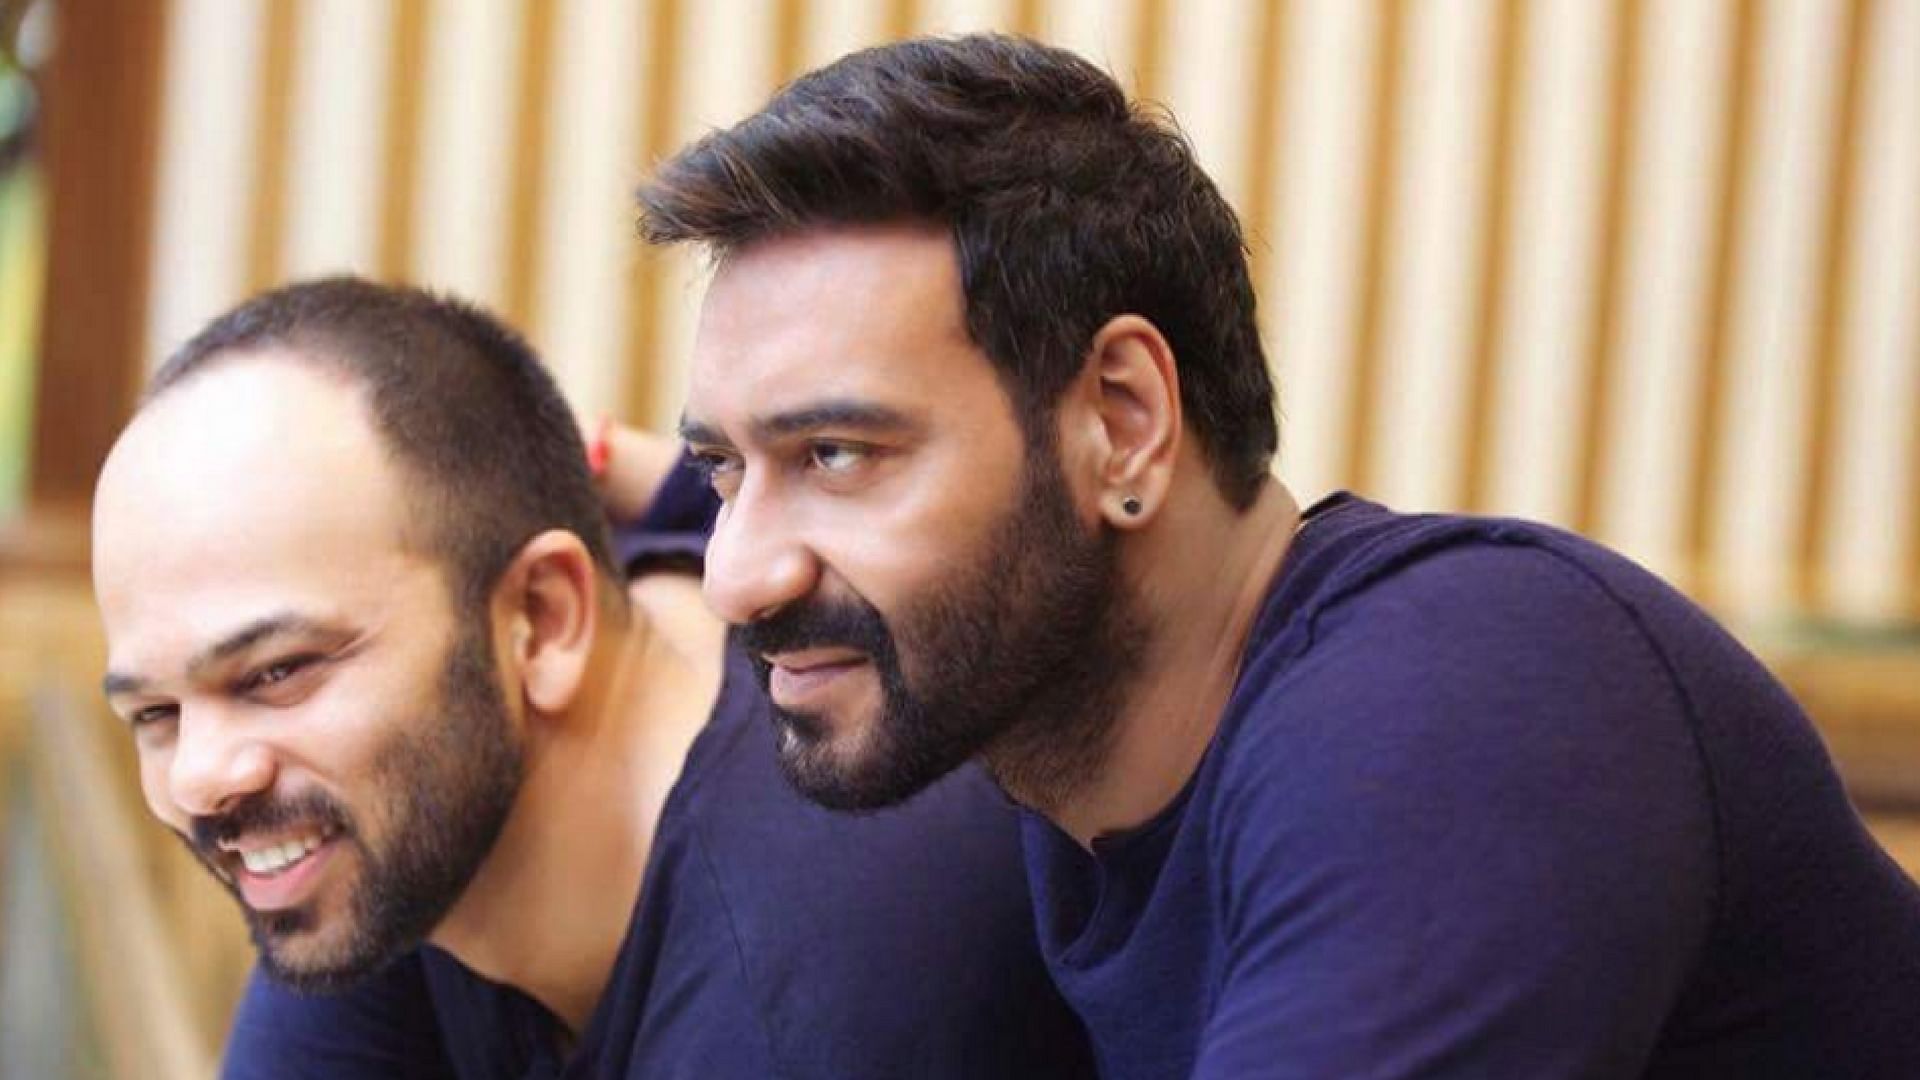 Rohit Shetty and Ajay Devgn are ready for fireworks with <i>Golmaal Again</i>. (Photo Courtesy: <a href="https://twitter.com/NikhilS39081533">Twitter/@NikhilS39081533</a>)